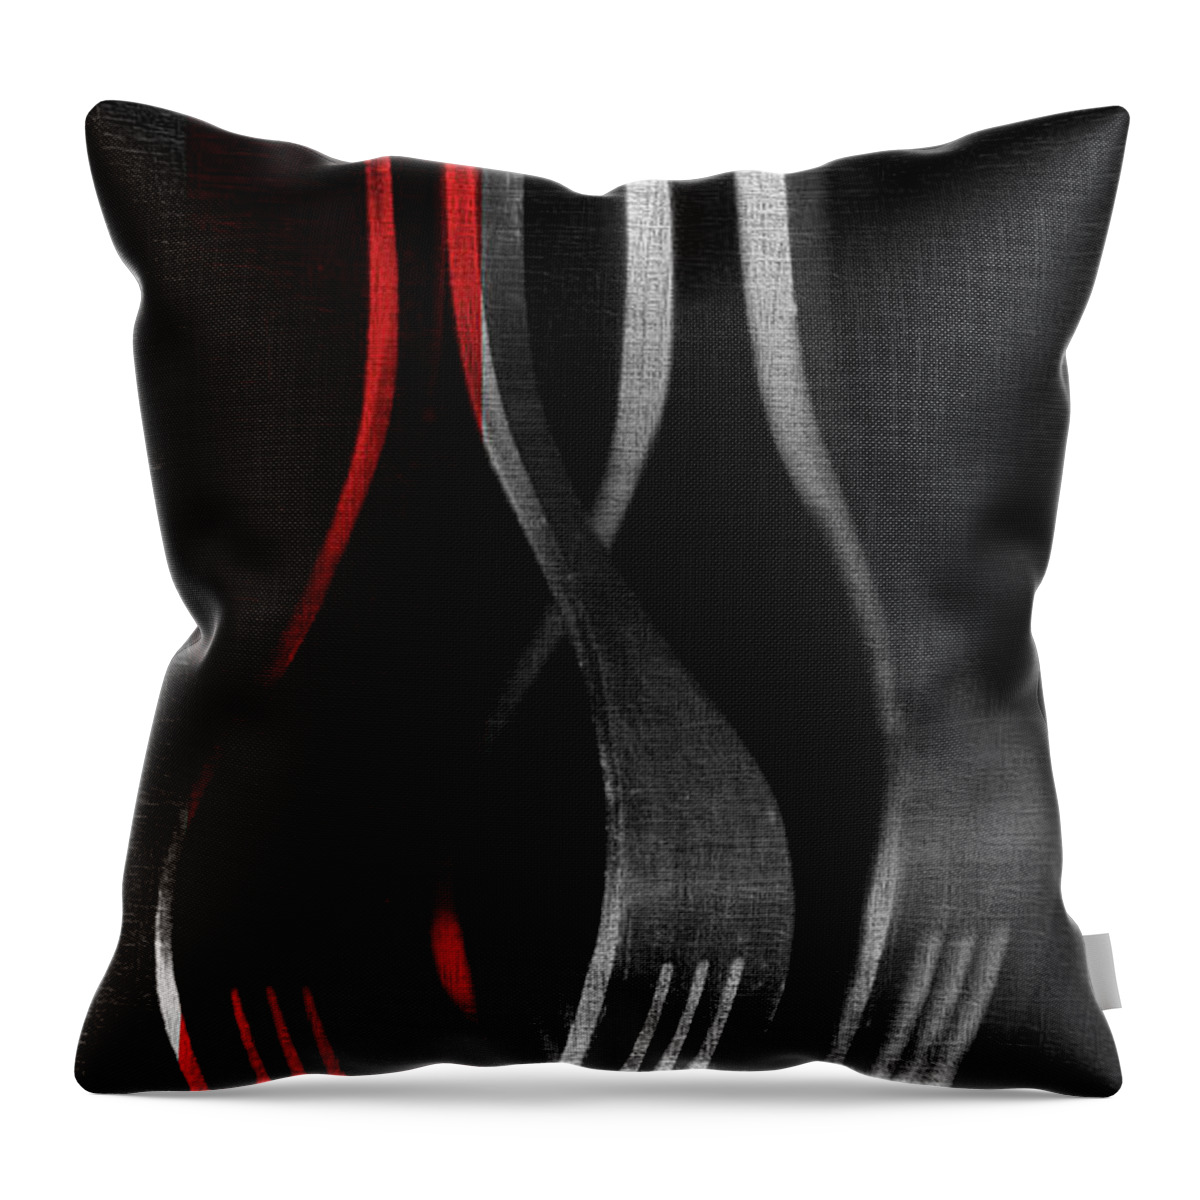 Kitchen Art Throw Pillow featuring the photograph I'm A Little Red With Envy by Rene Crystal